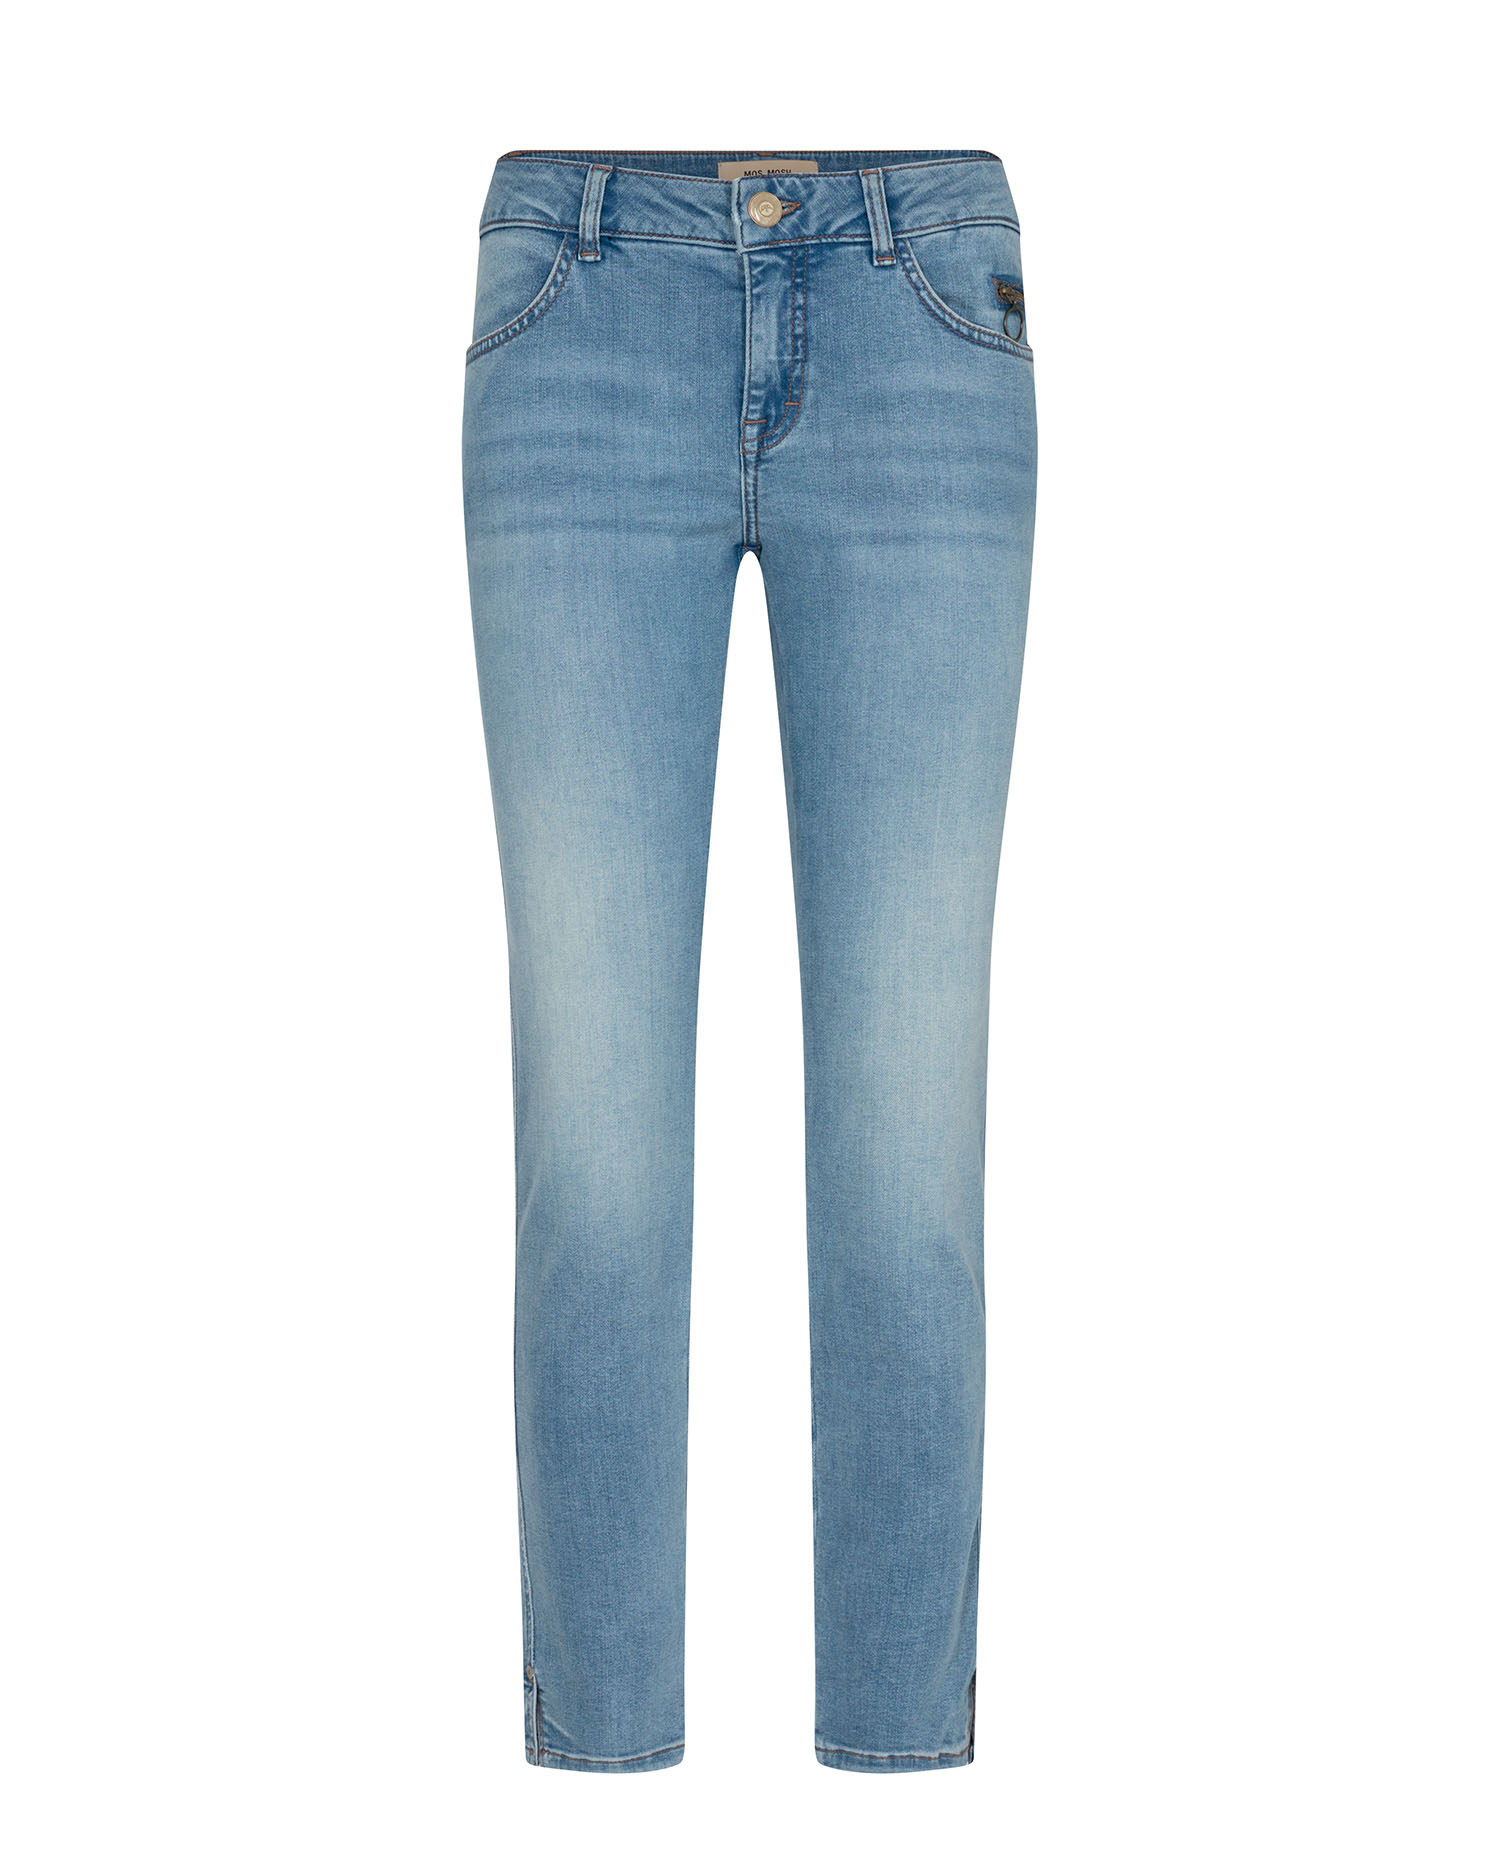 Sumner Vacation Jeans 